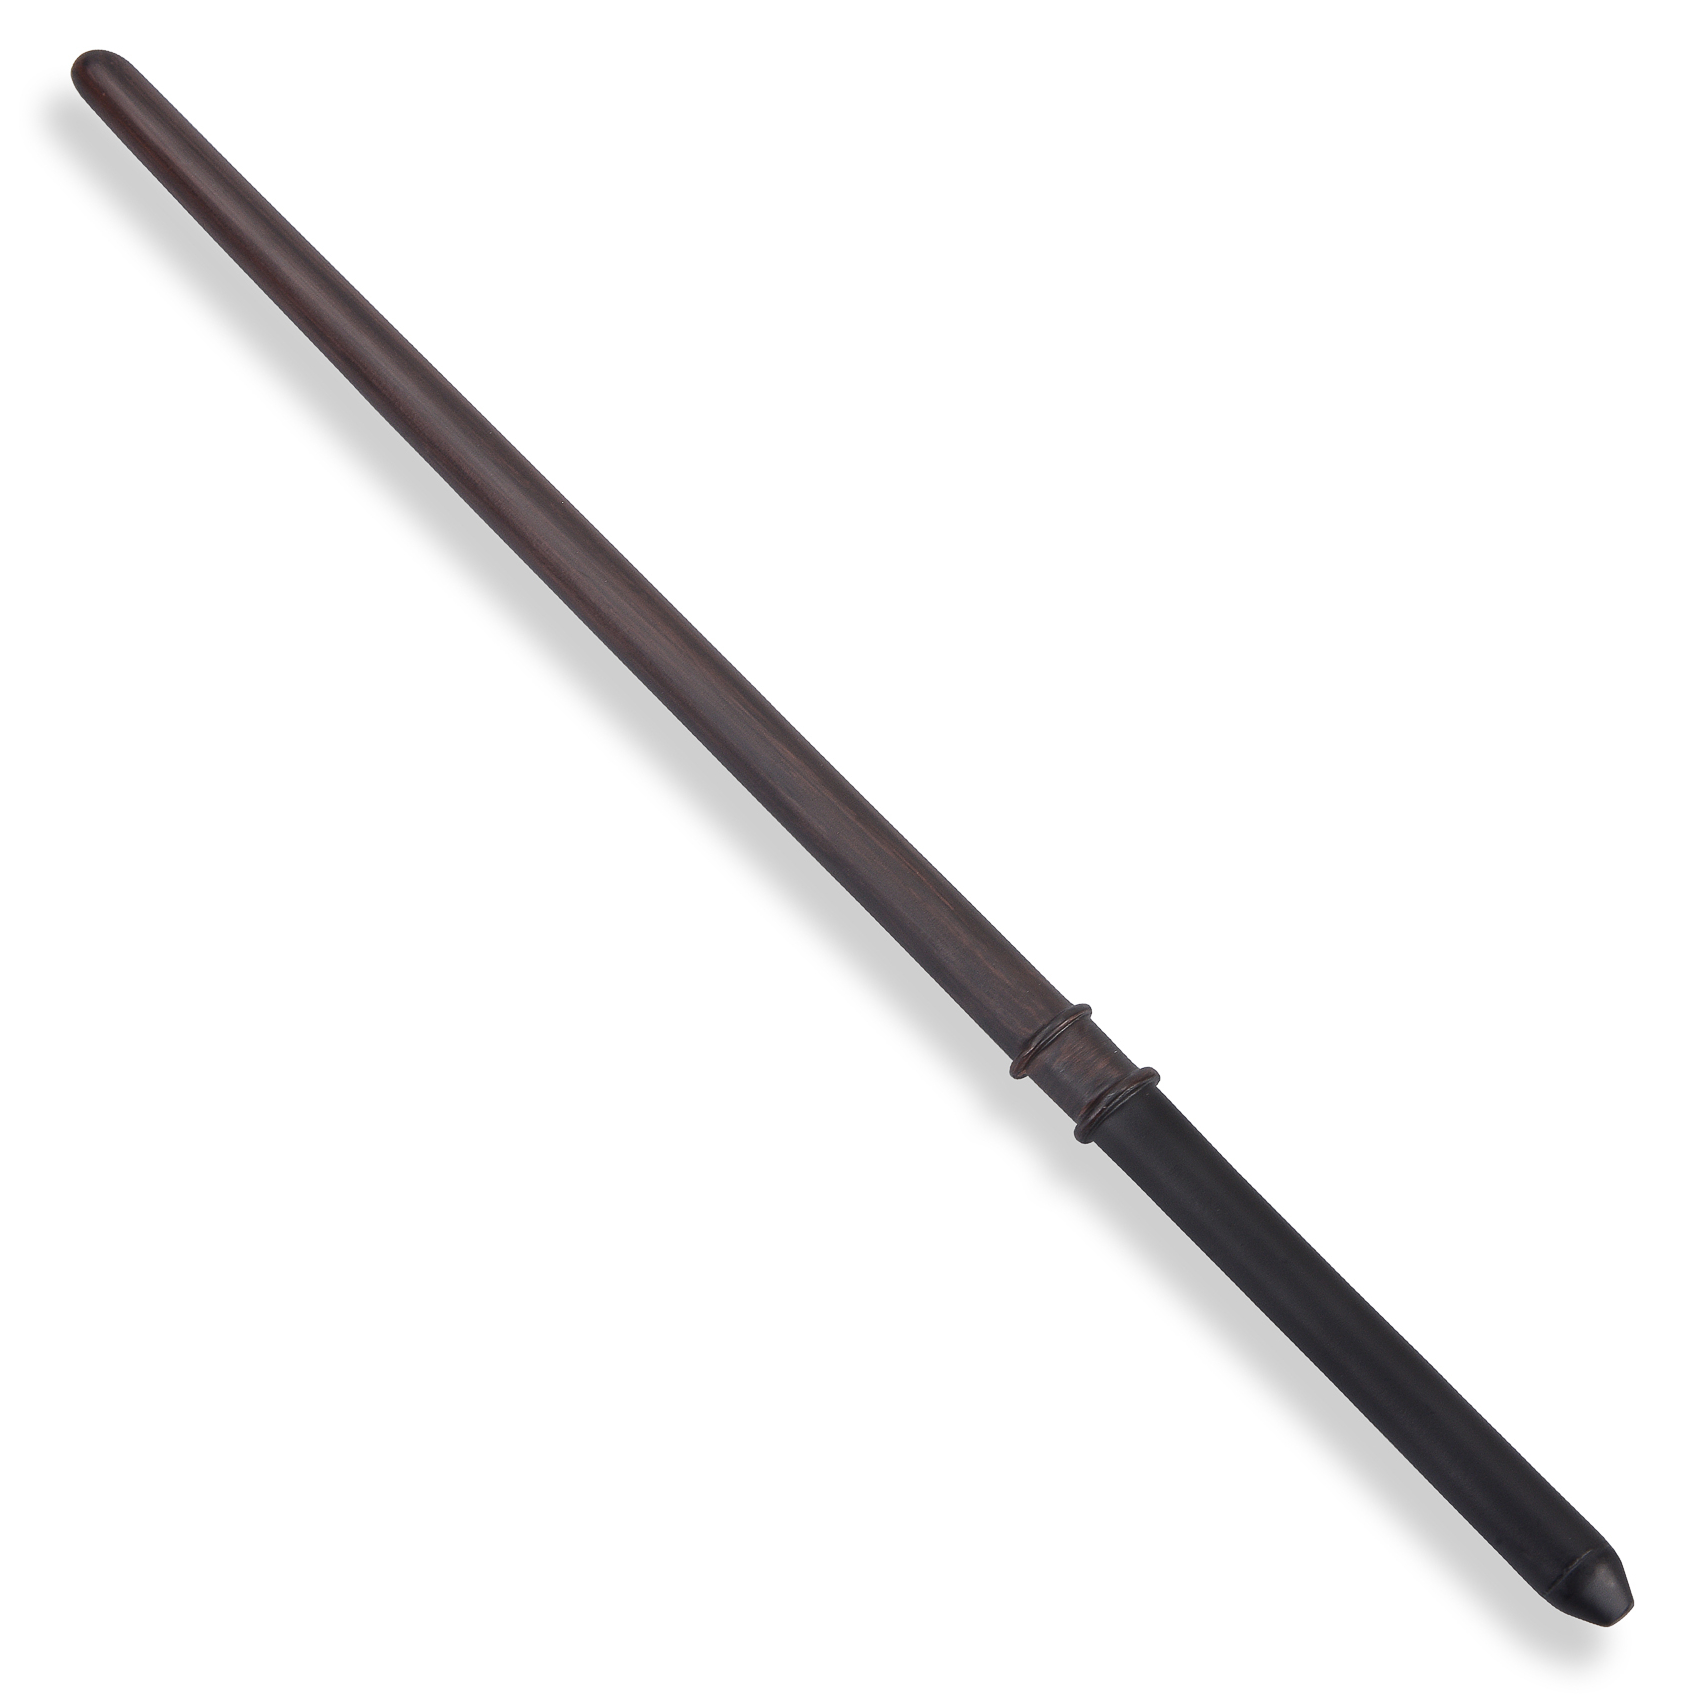 What was Harry Potters first wand made of?